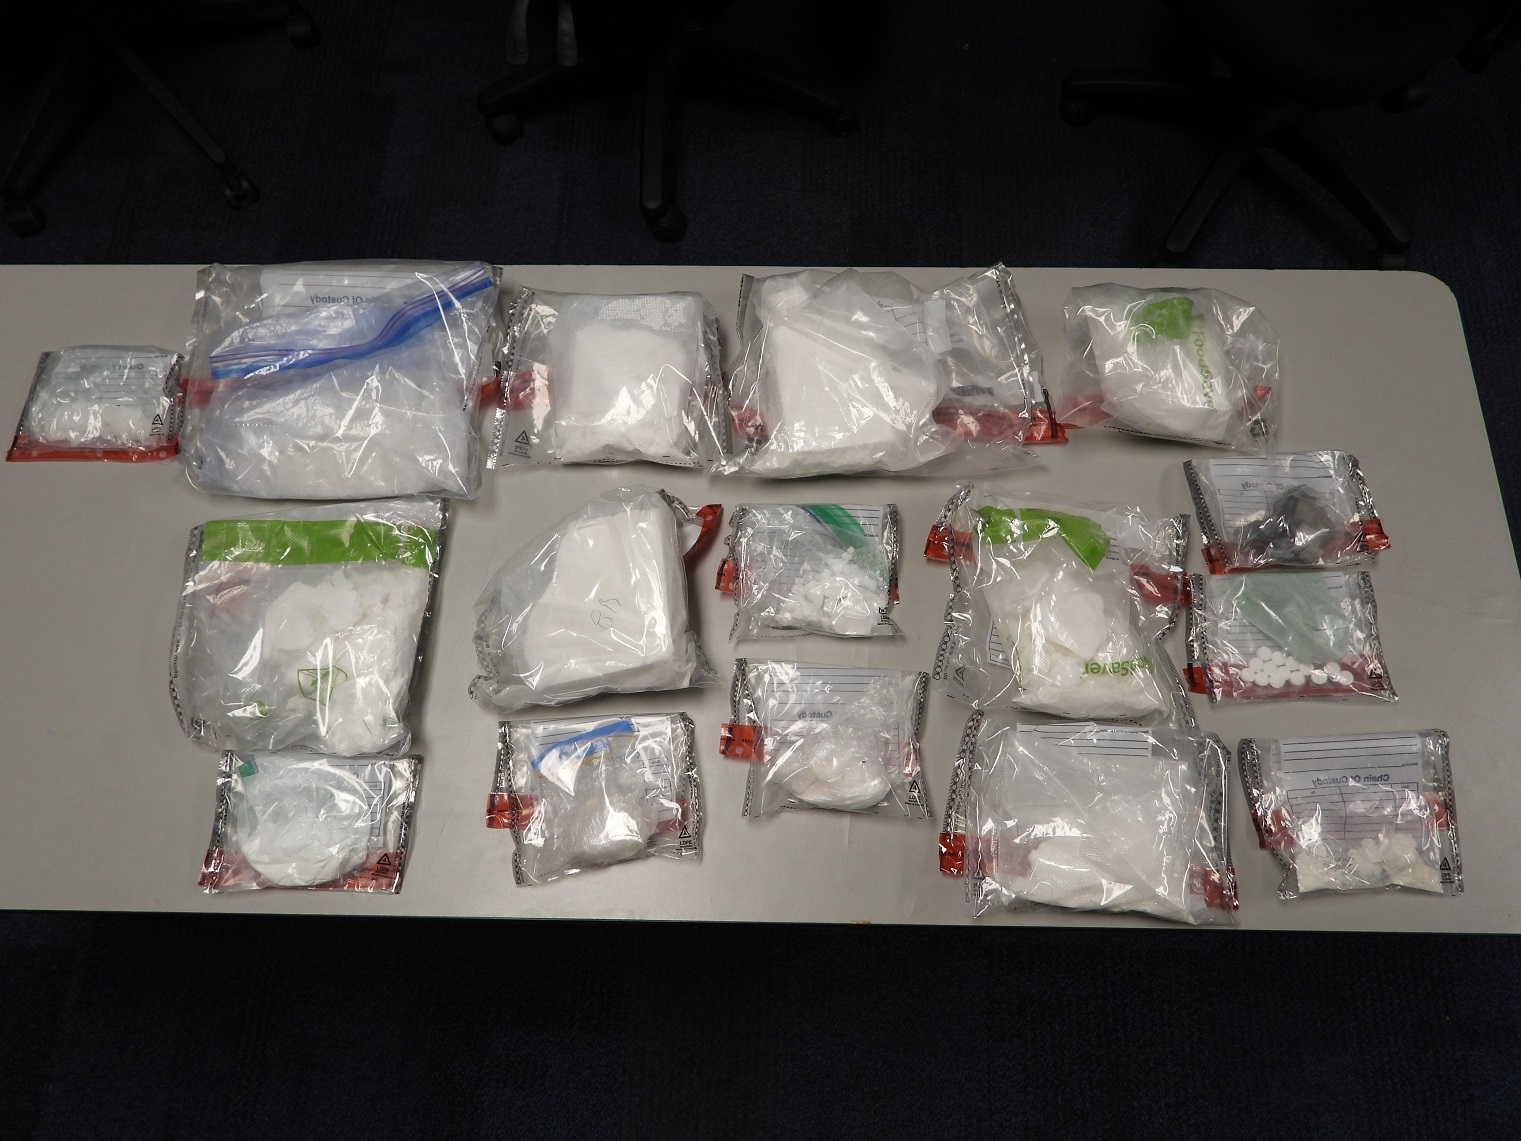 Drugs valued at nearly $300K, loaded handguns seized during search of home 